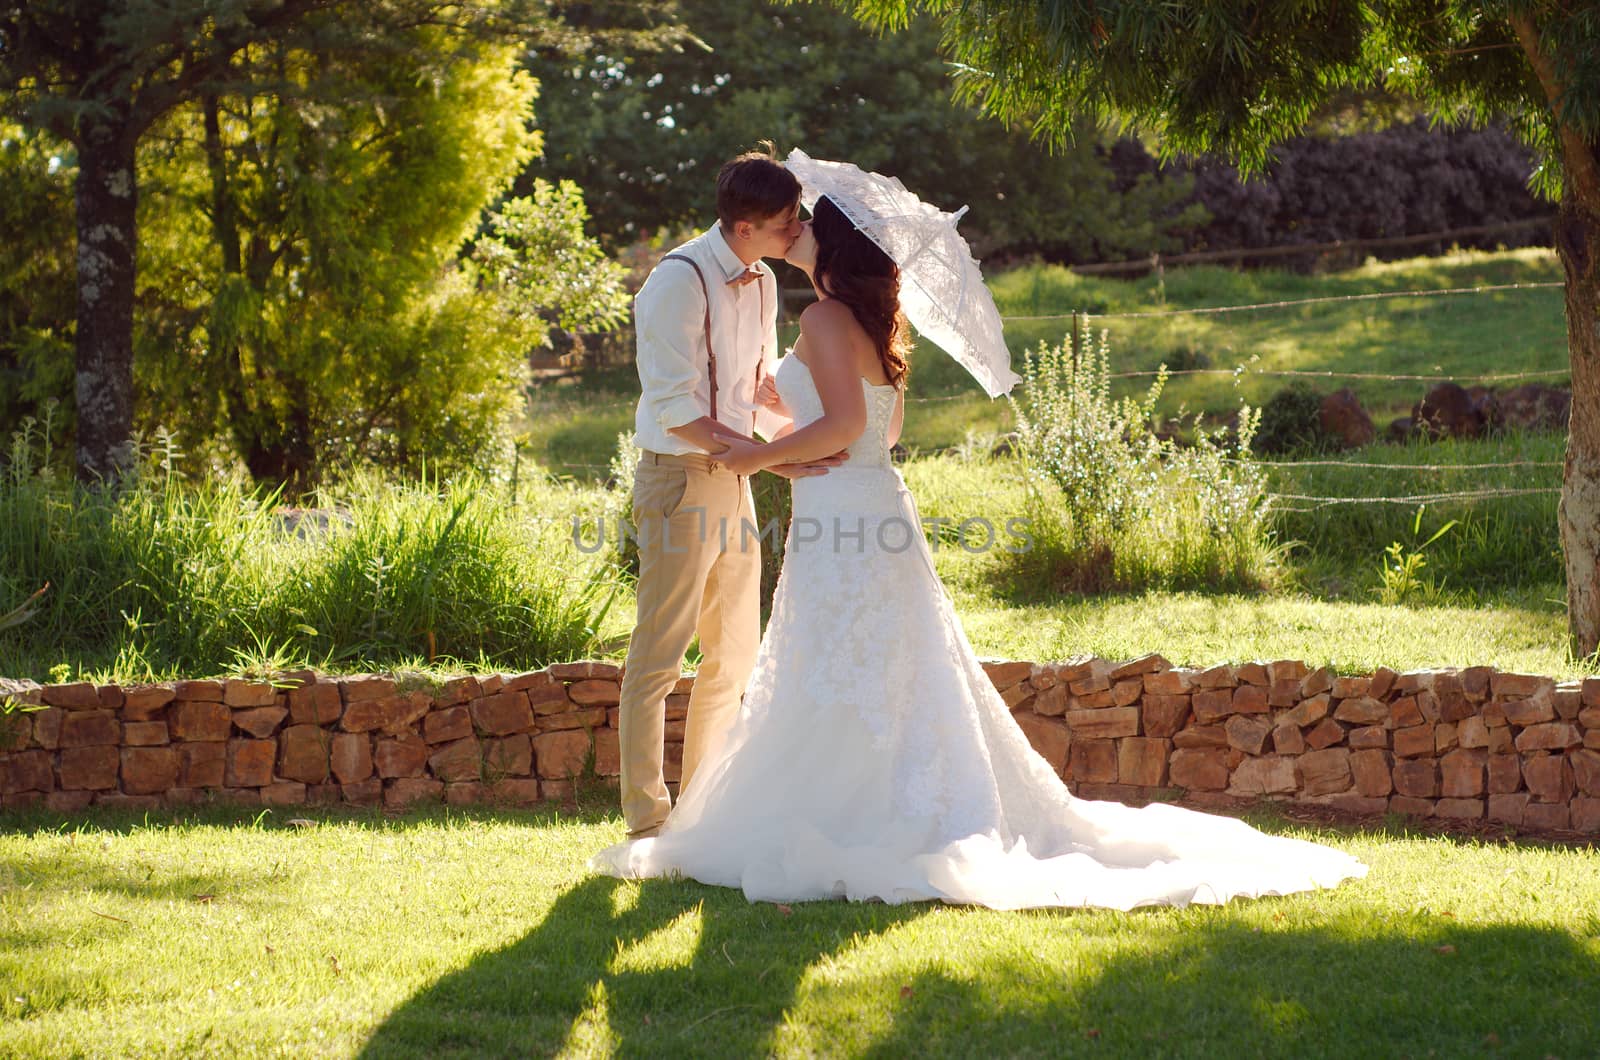 Bride and groom kissing in garden wedding by alistaircotton